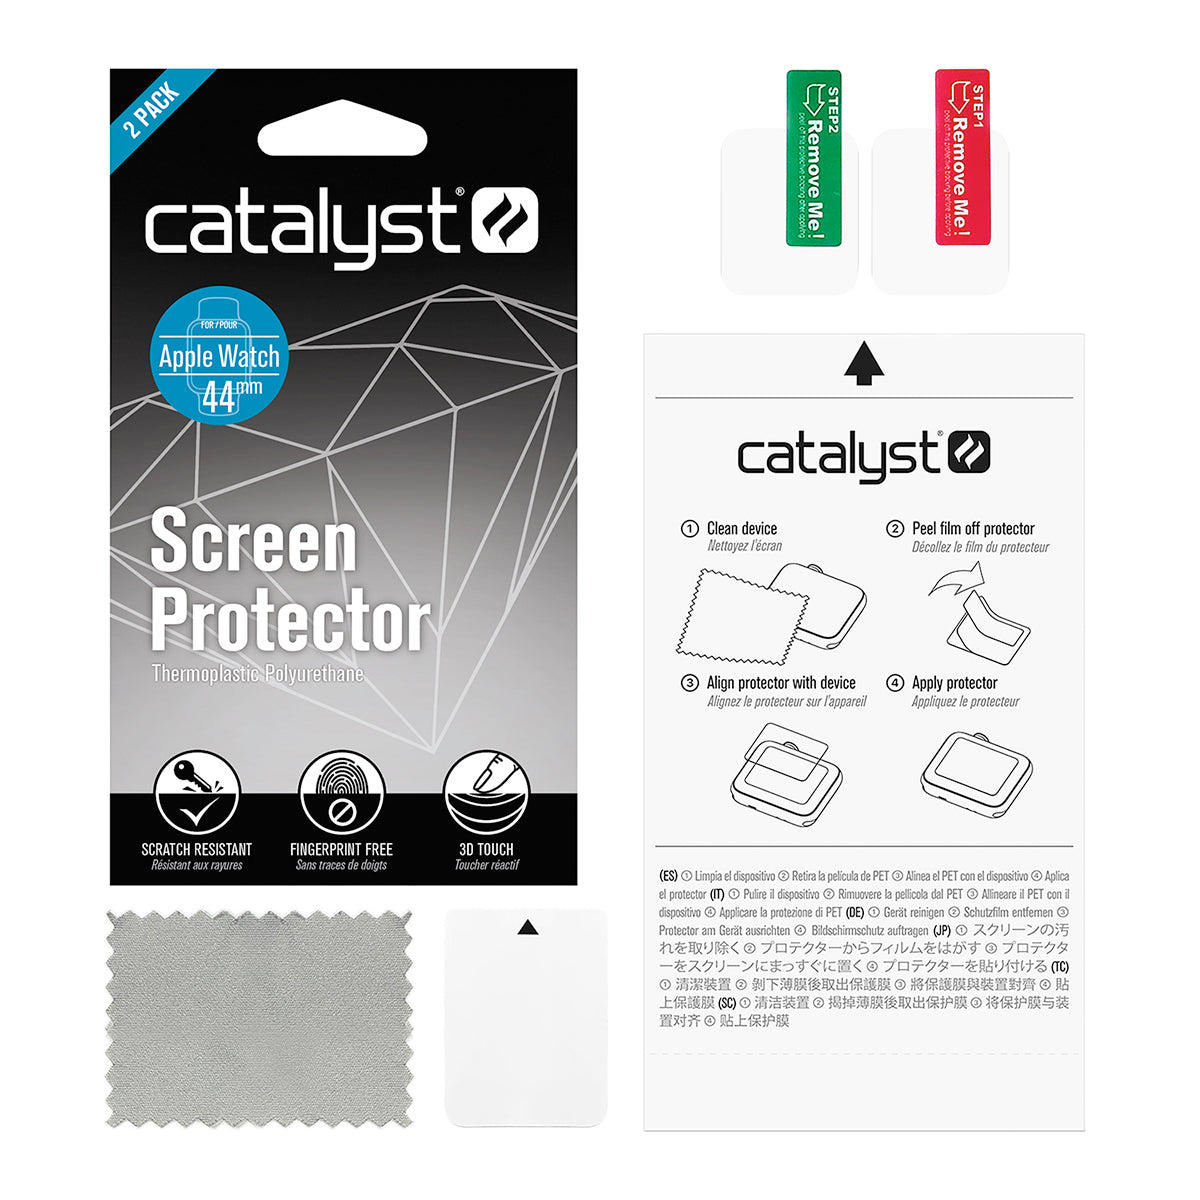 catalyst apple watch series 6 5 4 se gen 2 1 40mm 44mm waterproof case band packaging of the screen protector for apple watch microfiber cloth user manual screen protector